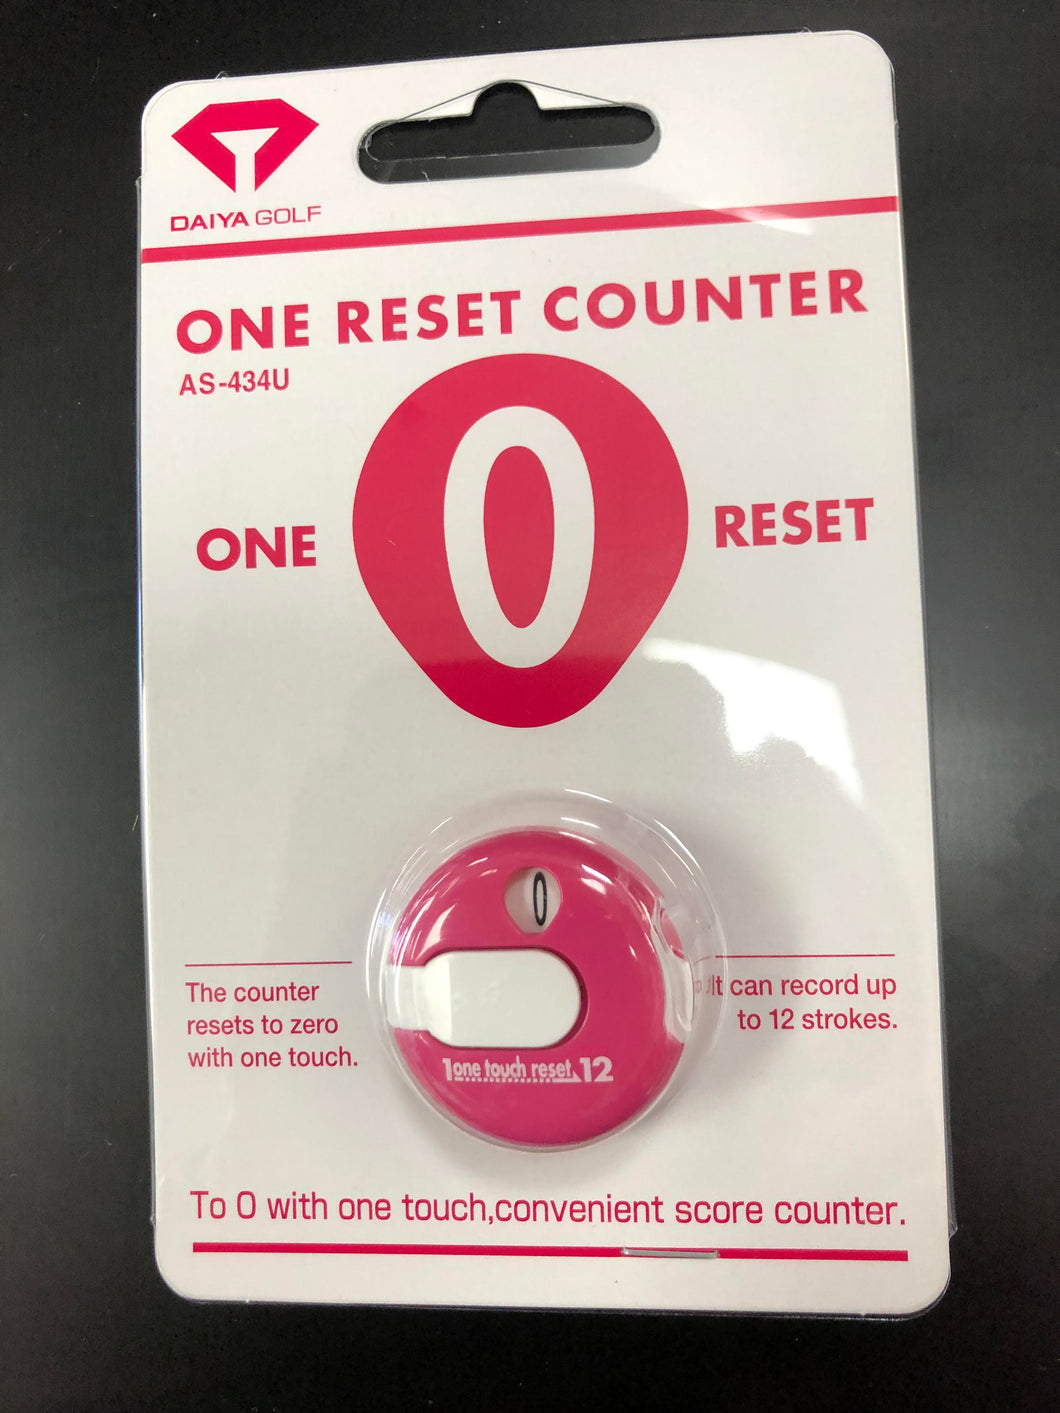 One Reset Counter